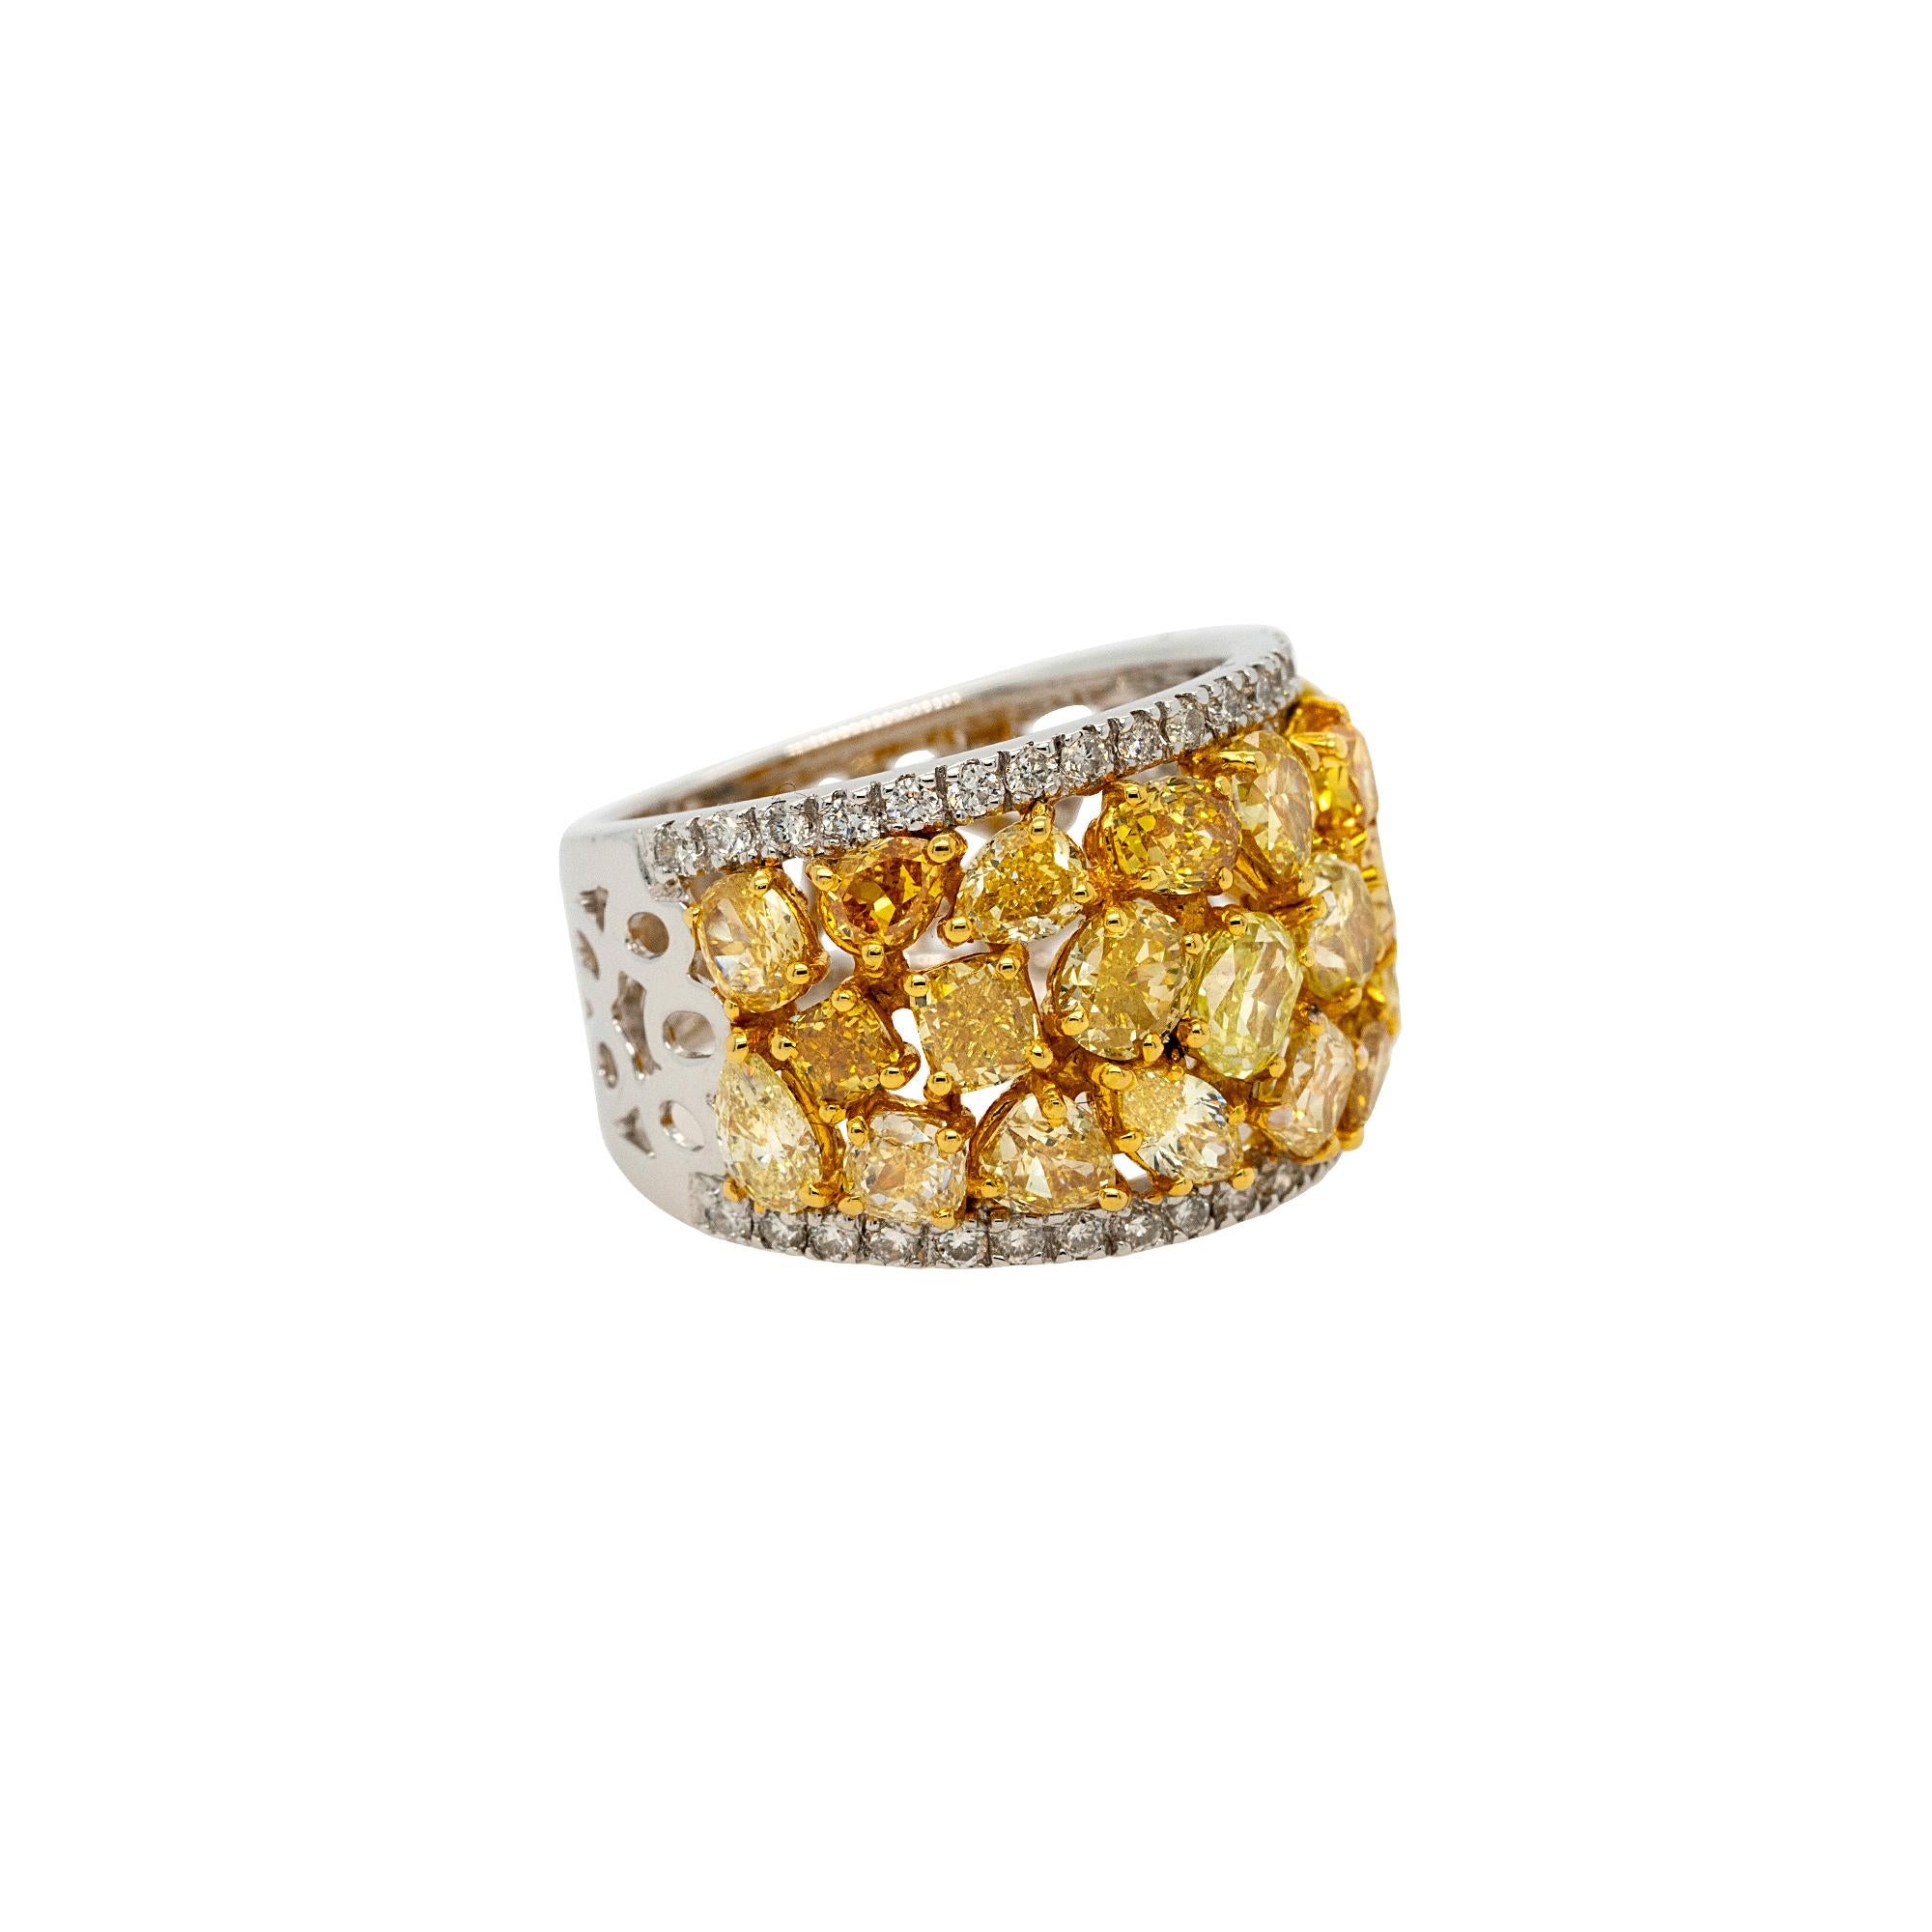 Diamond Details:
0.44ct Round Brilliant Natural Diamond
5.17ct Fancy Color Natural Diamond
G Color VS Clarity
Ring Material: 18k White & Yellow Gold
Ring Size: 6.5 (can be sized)
Total Weight: 7.9g(5.1dwt)
This item comes with a presentation